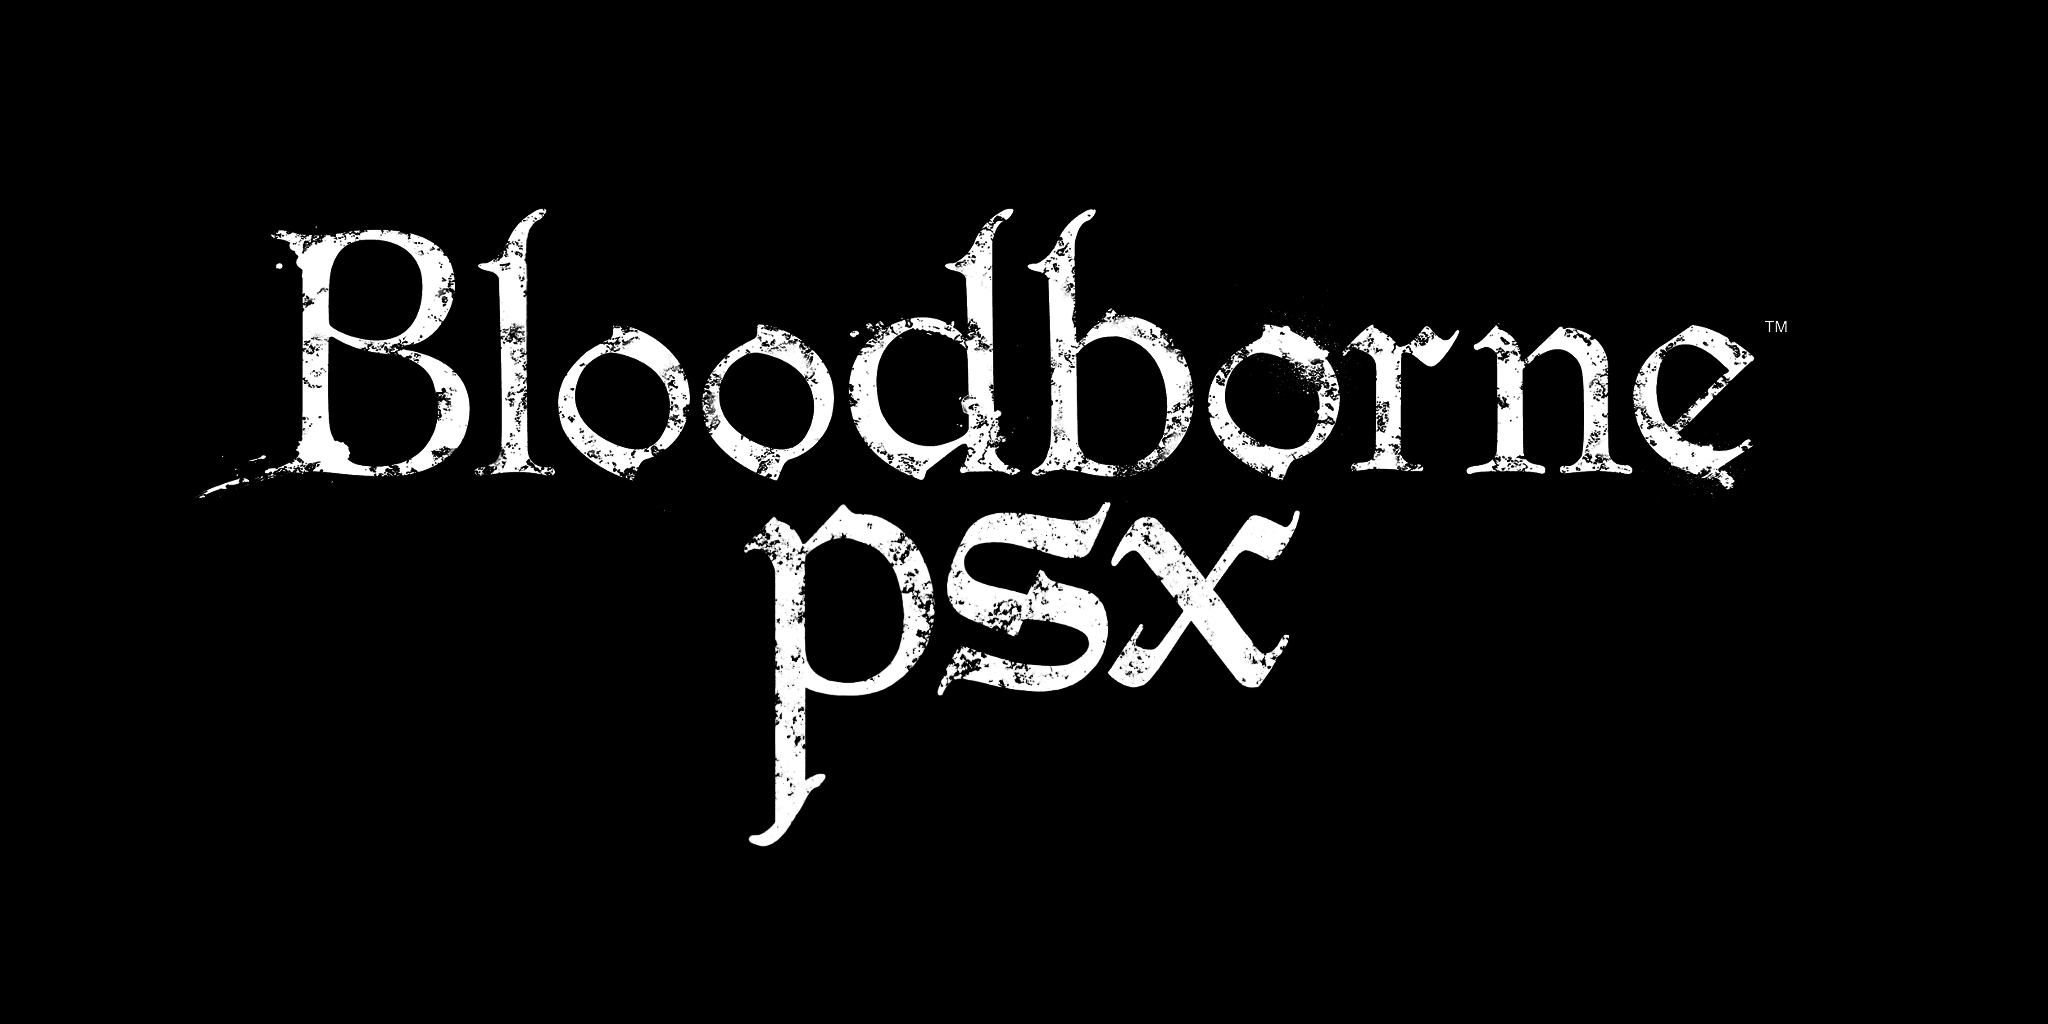 PlayStation Now Library Adds Bloodborne and 9 Other TItles